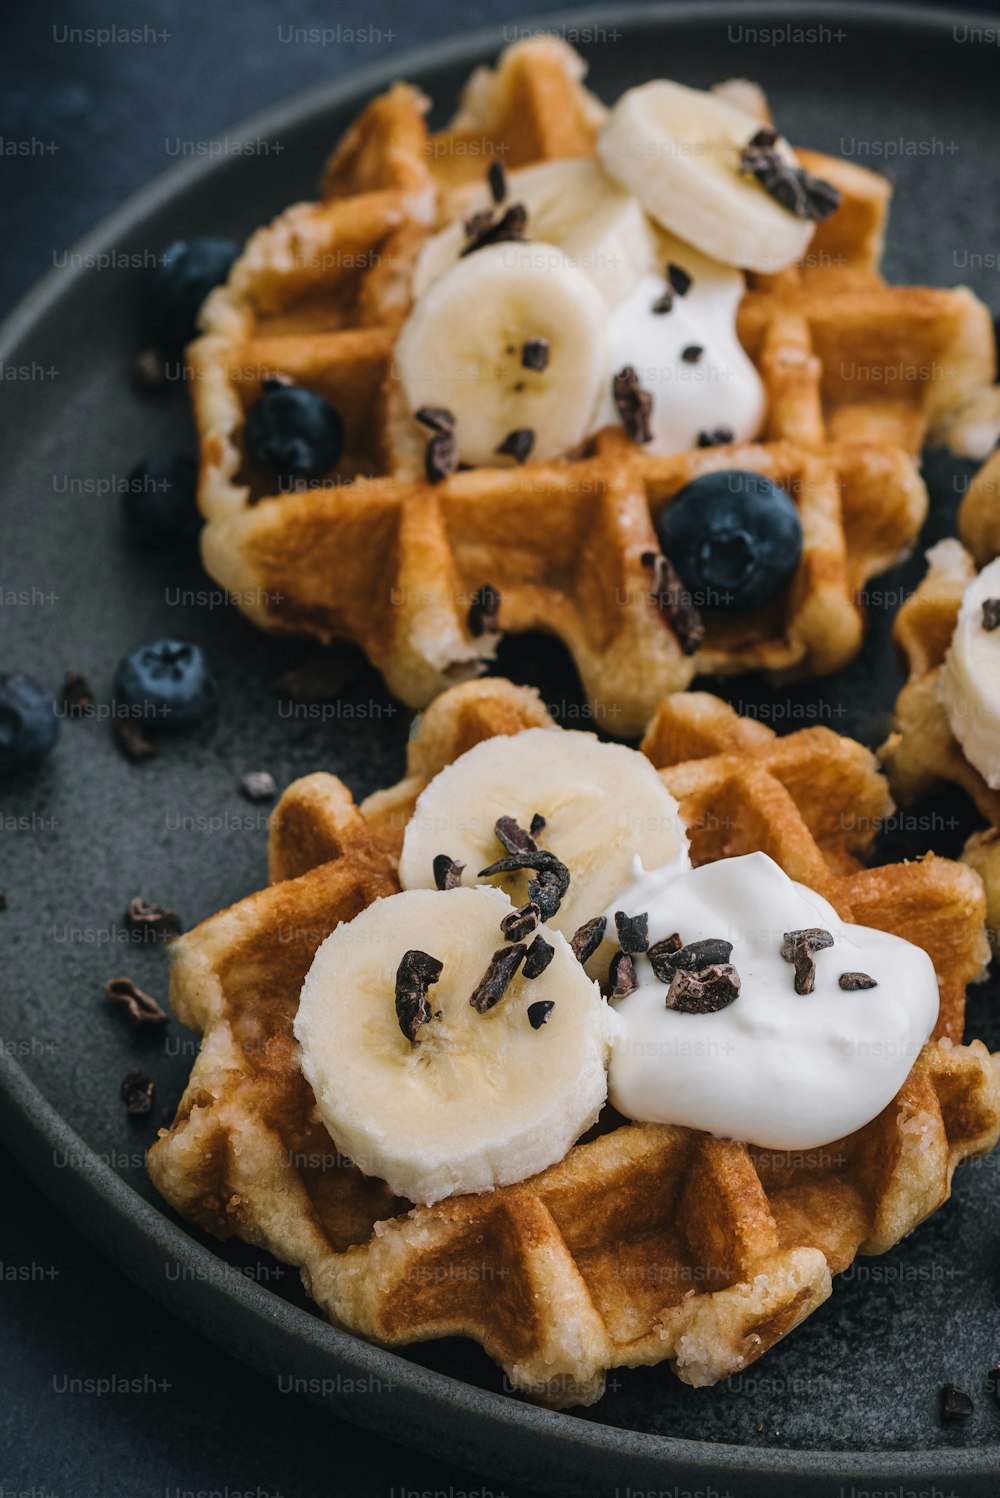 a plate of waffles topped with bananas and blueberries